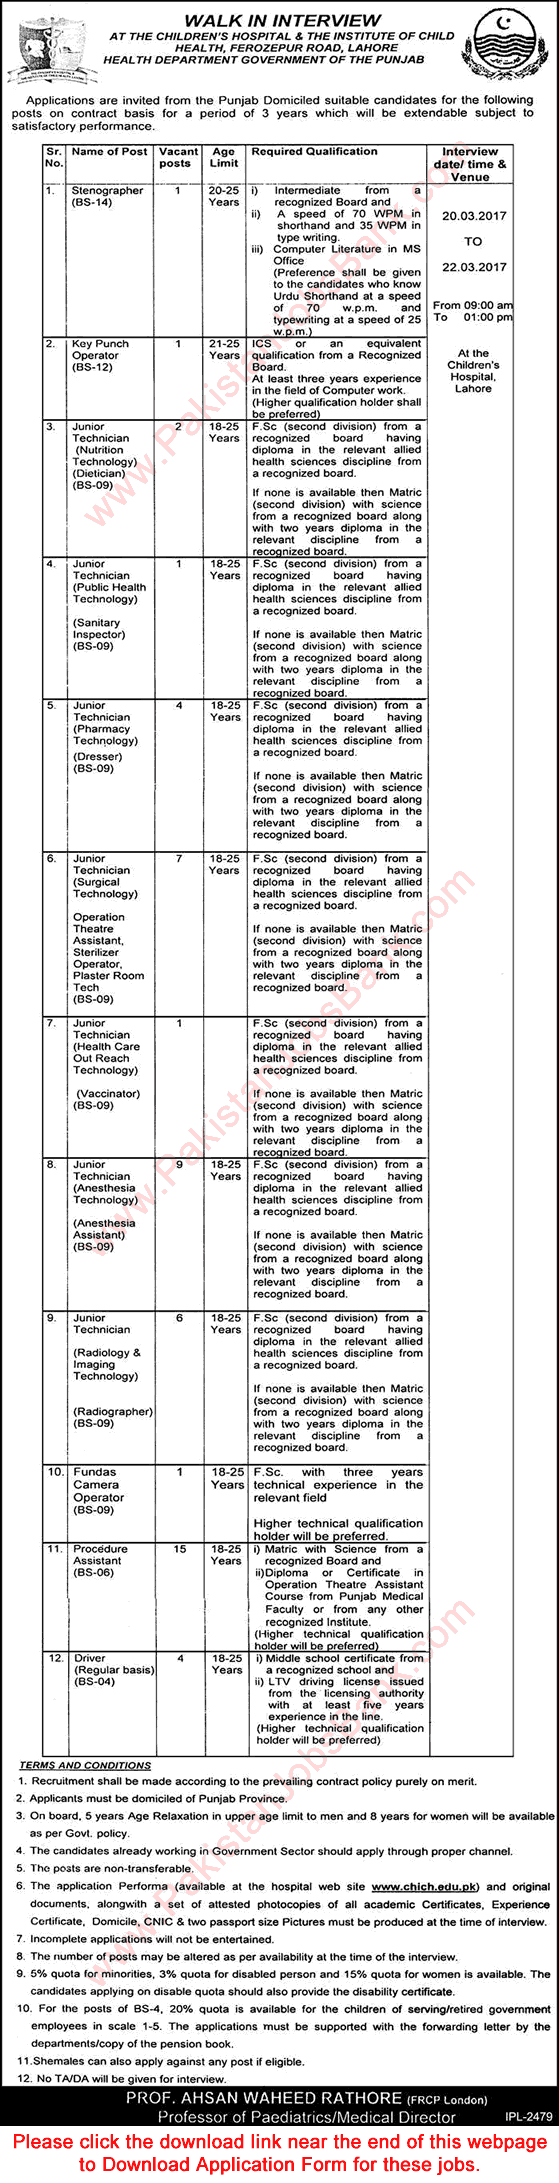 Children's Hospital Lahore Jobs 2017 March Walk In Interview Medical Technicians, Procedure Assistants & Others Latest